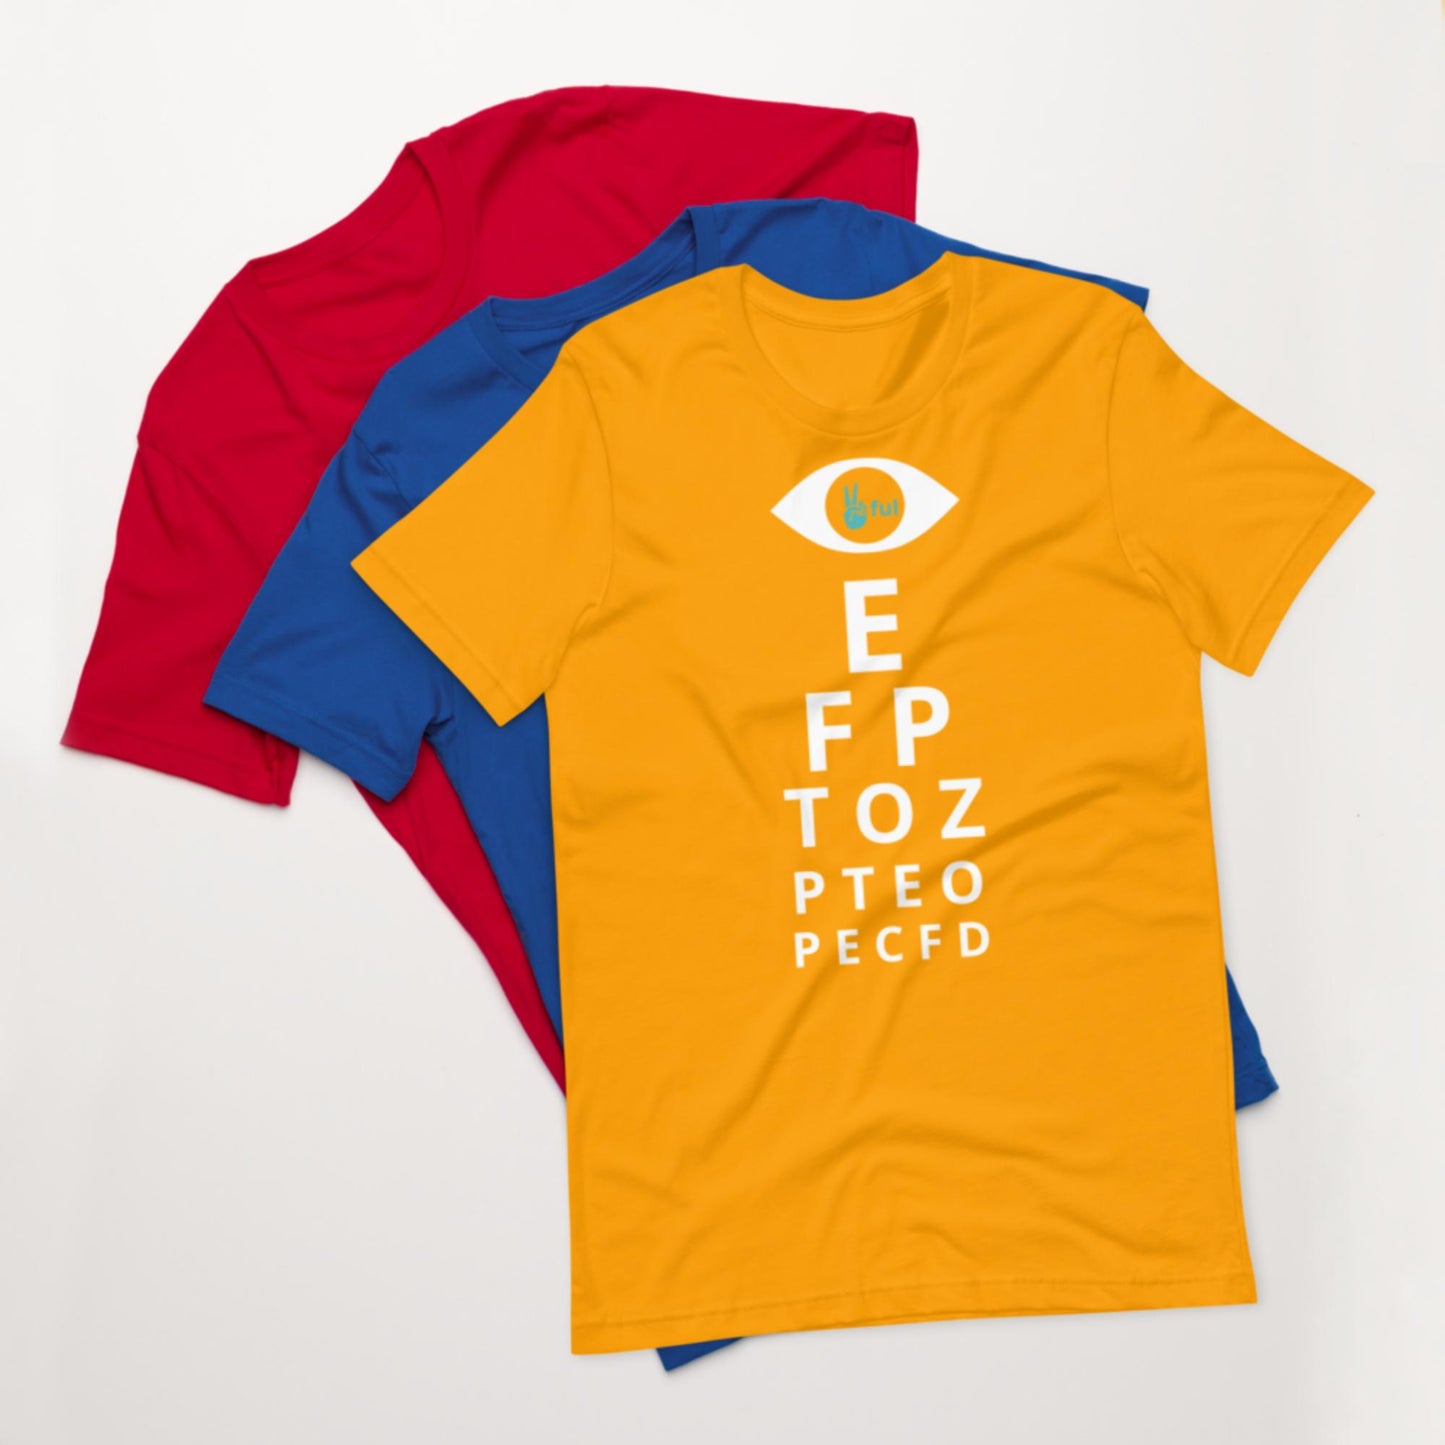 Find the Peaceful things shirt XS-5XL